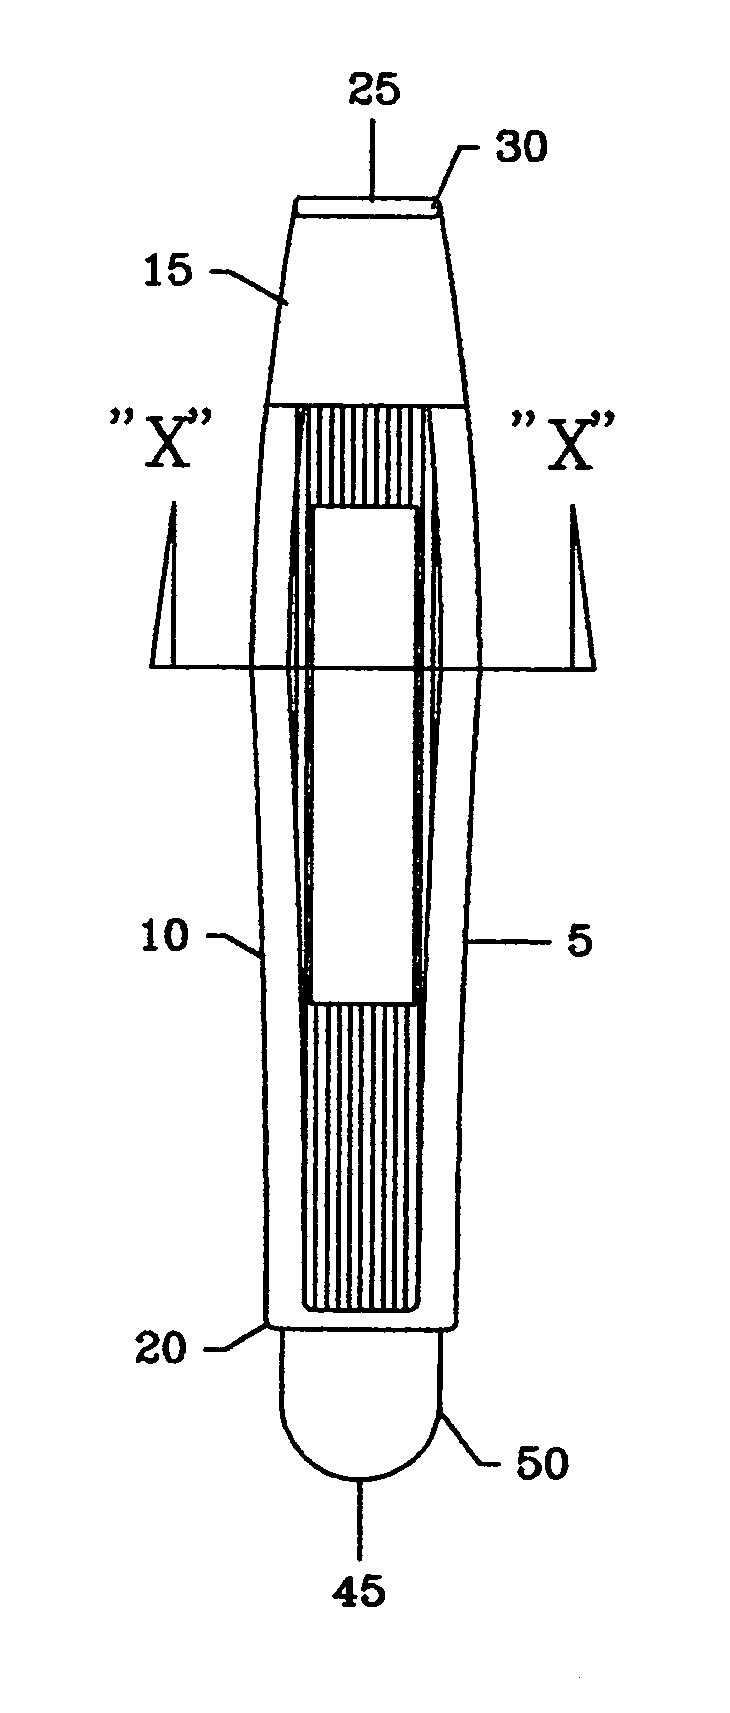 Apparatus for dislodging an intraoral device